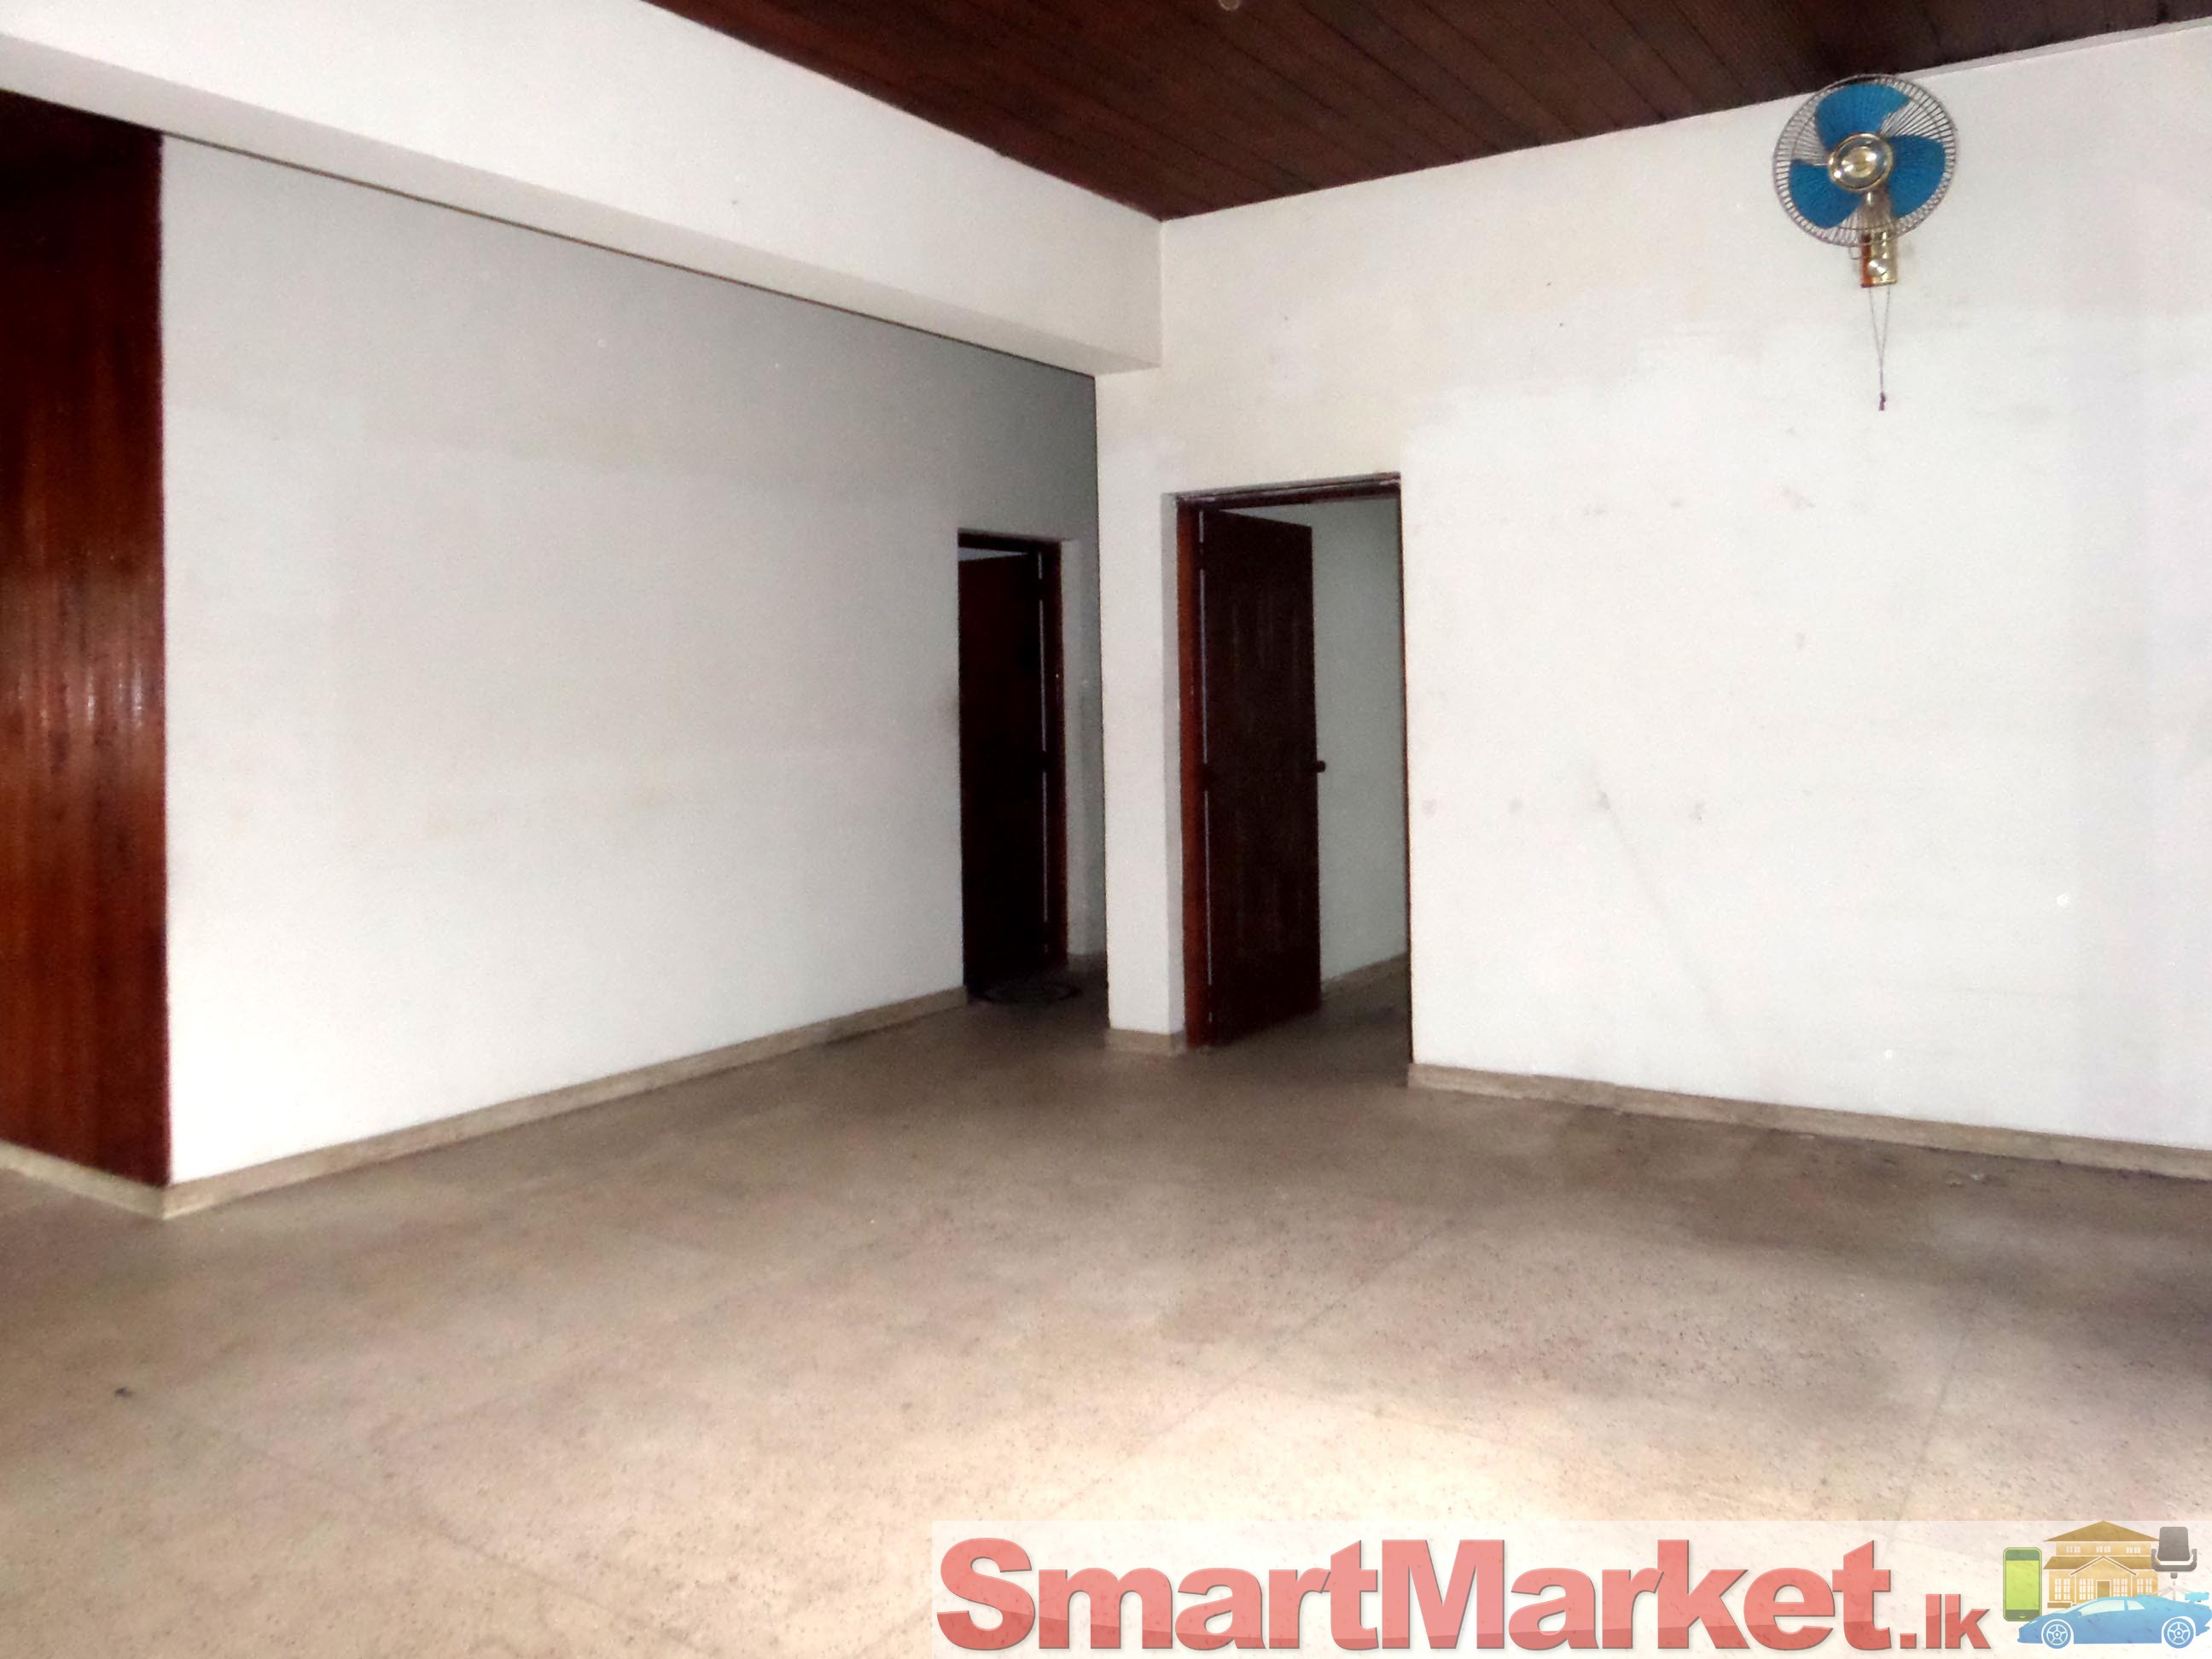 Commercial Building with Separate Entrance for Rent or Lease in Kandy Road Kelaniya